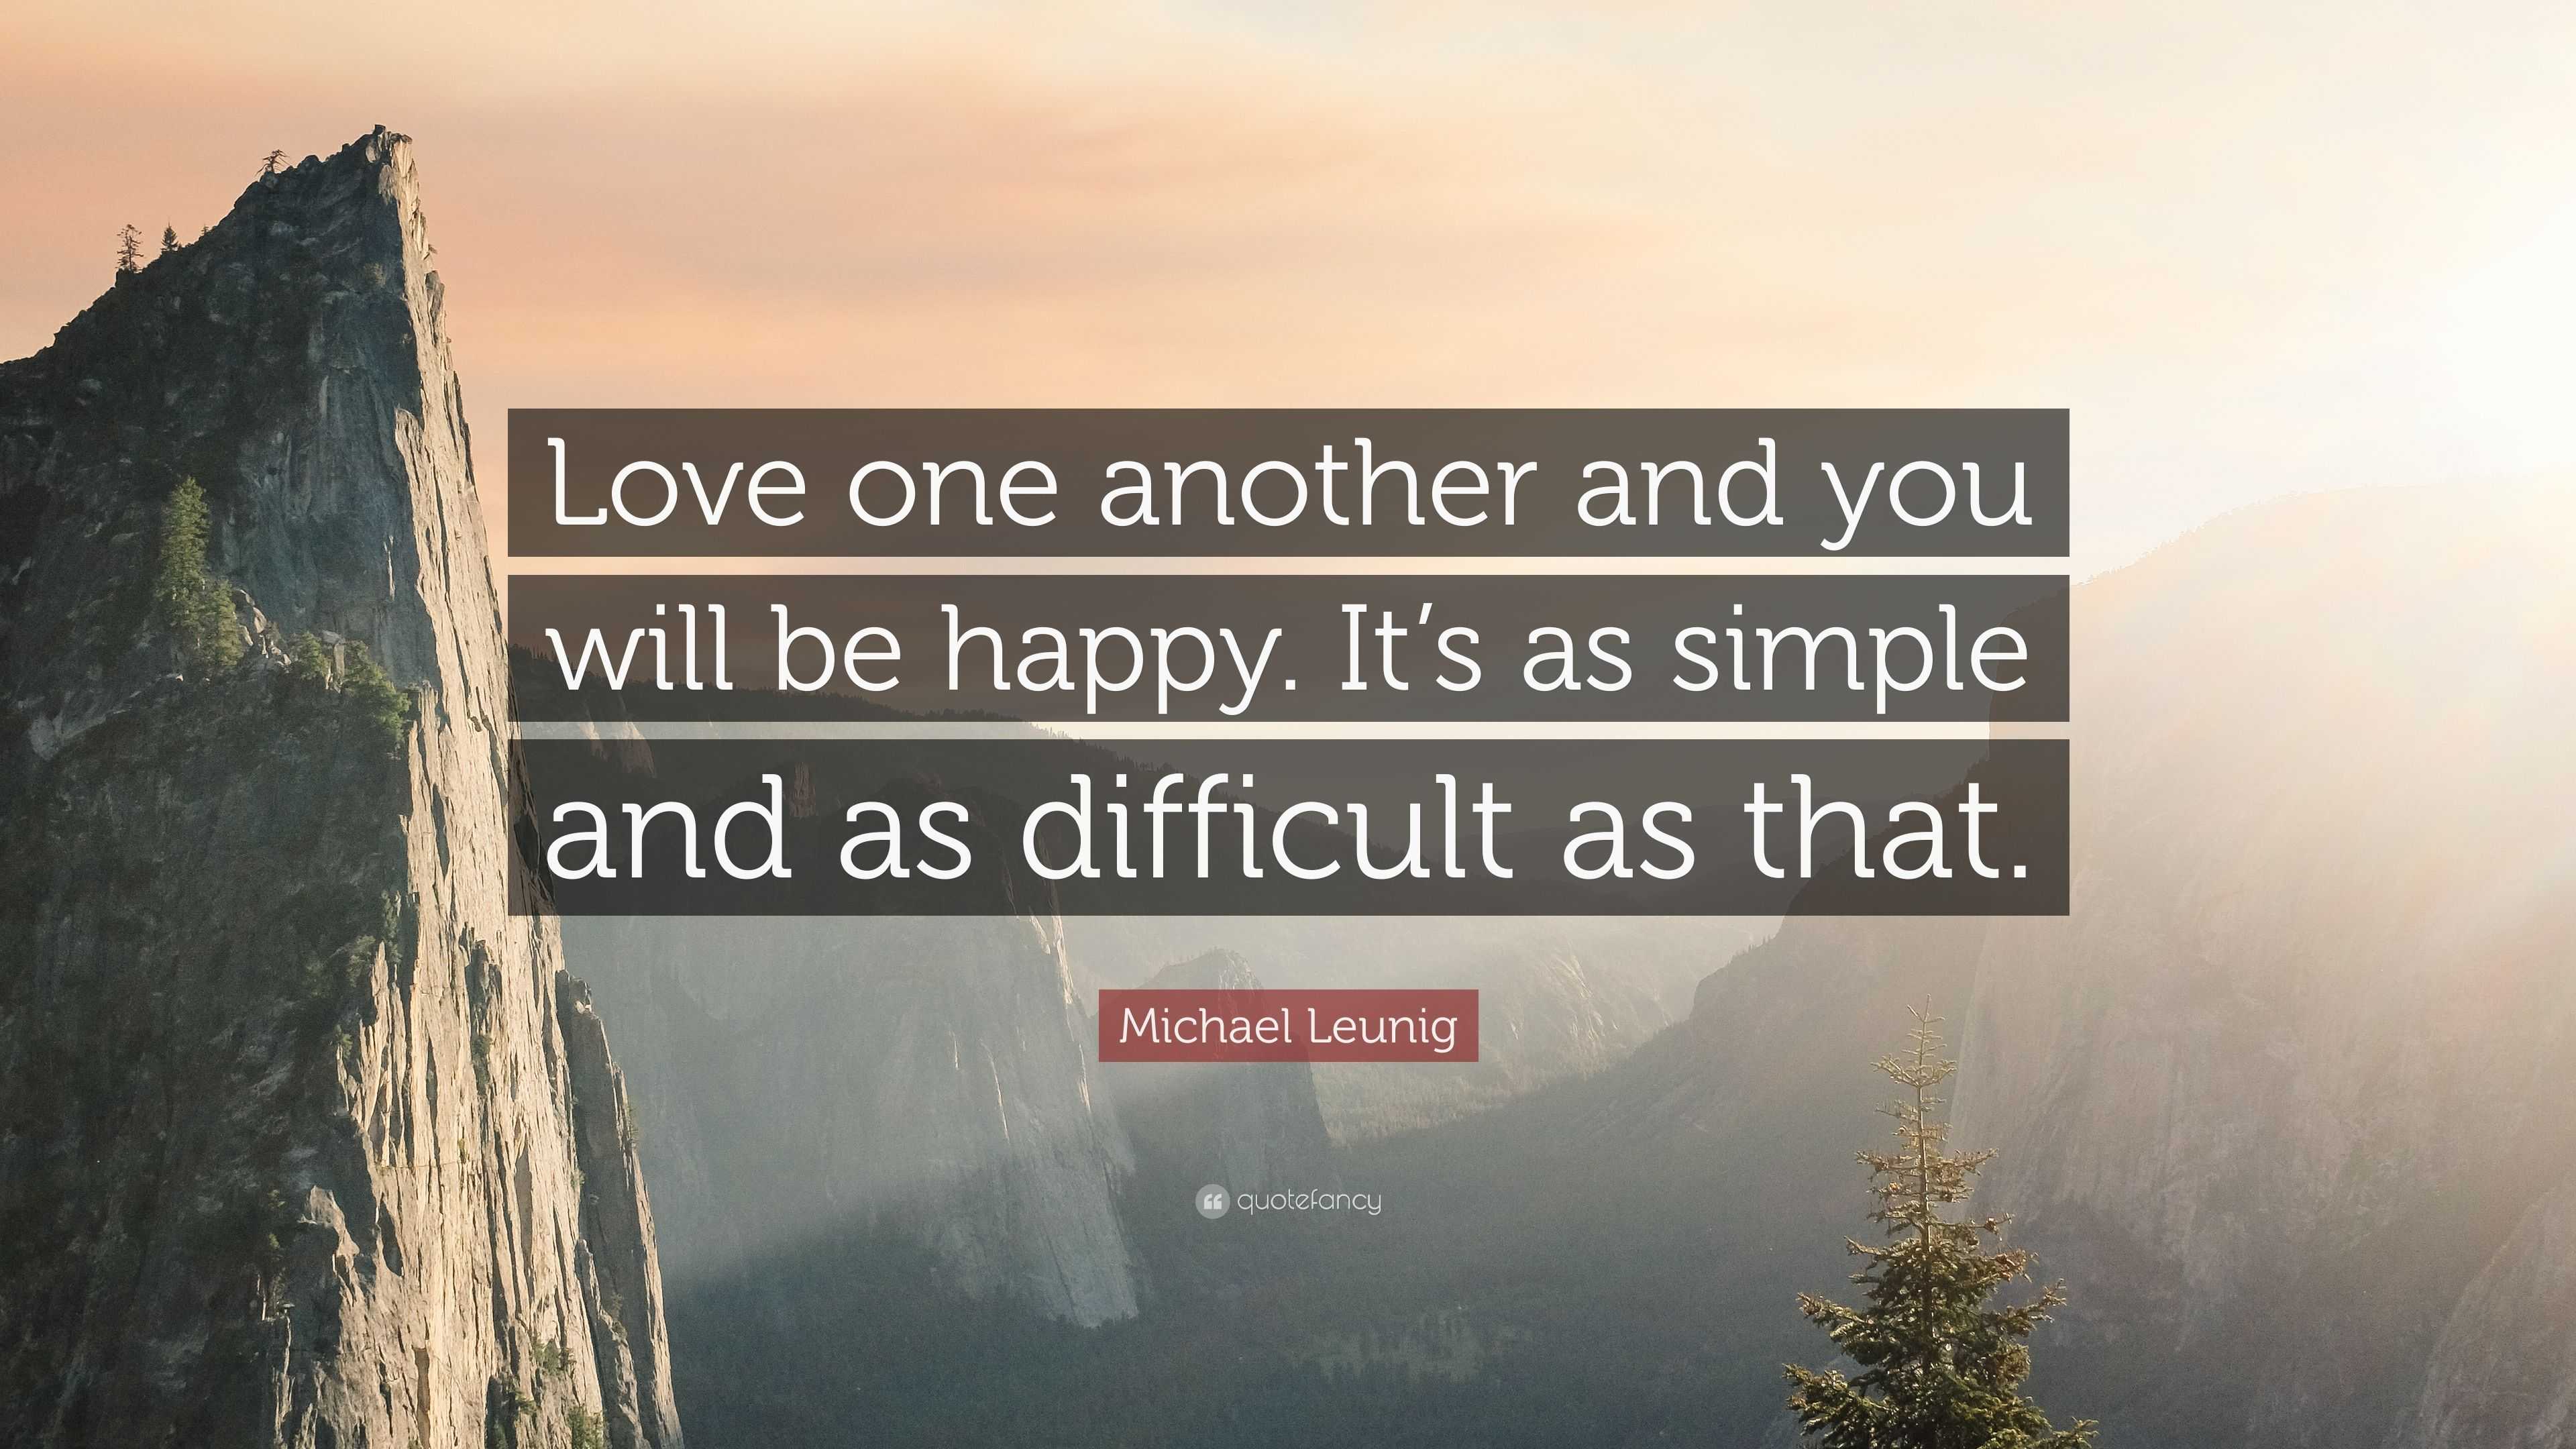 Michael Leunig Quote: “Love one another and you will be happy. It’s as ...